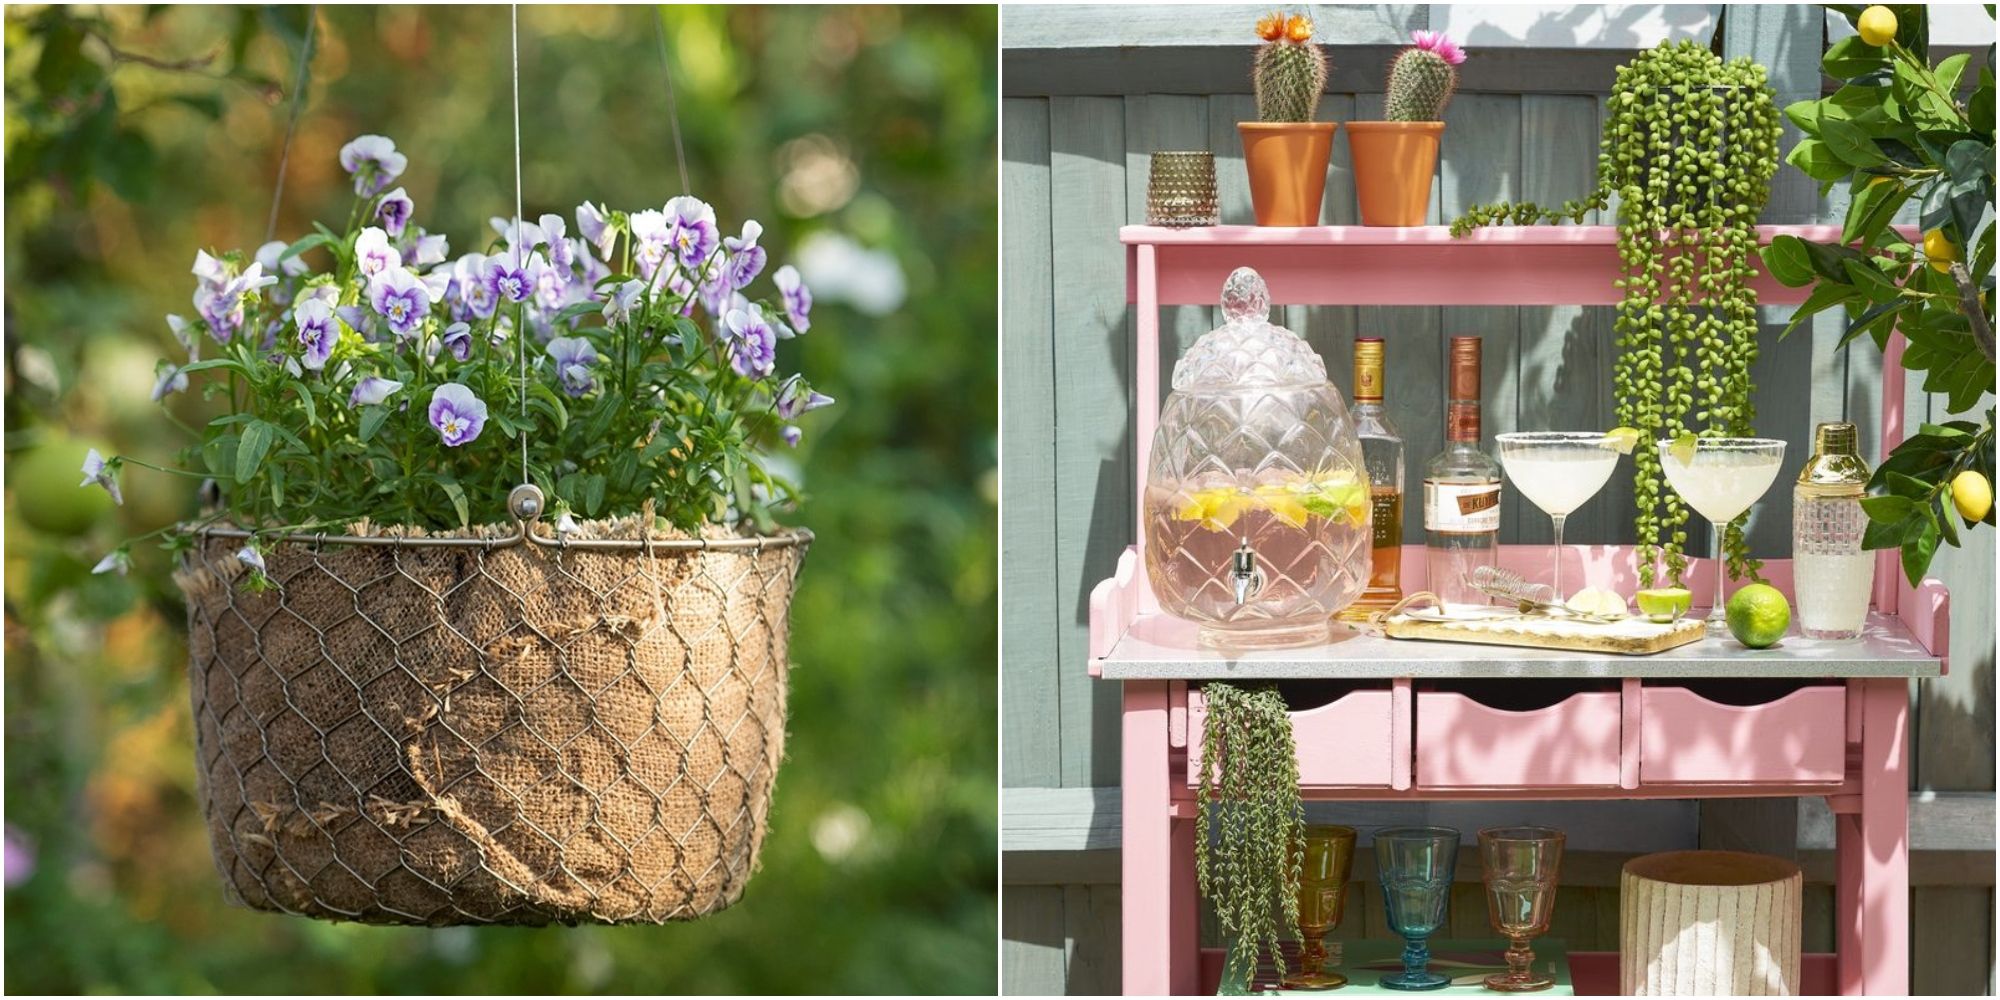 the Most Affordable Options for Purchasing Garden Flowers